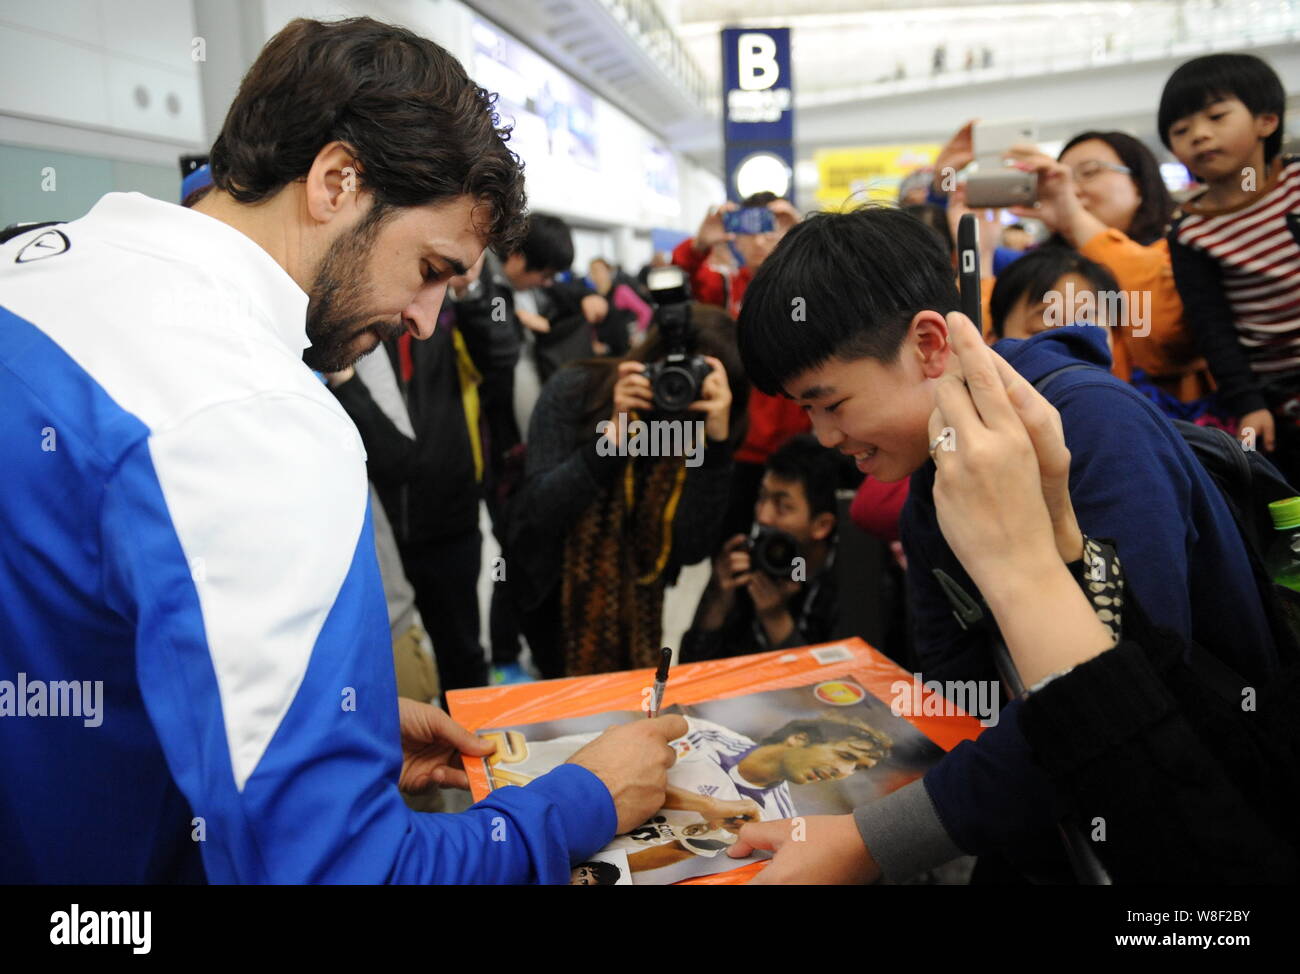 Spanish football star Raul Gonzalez Blanco of New York Cosmos, left, signs autographs for fans as he arrives at the Hong Kong International Airport in Stock Photo